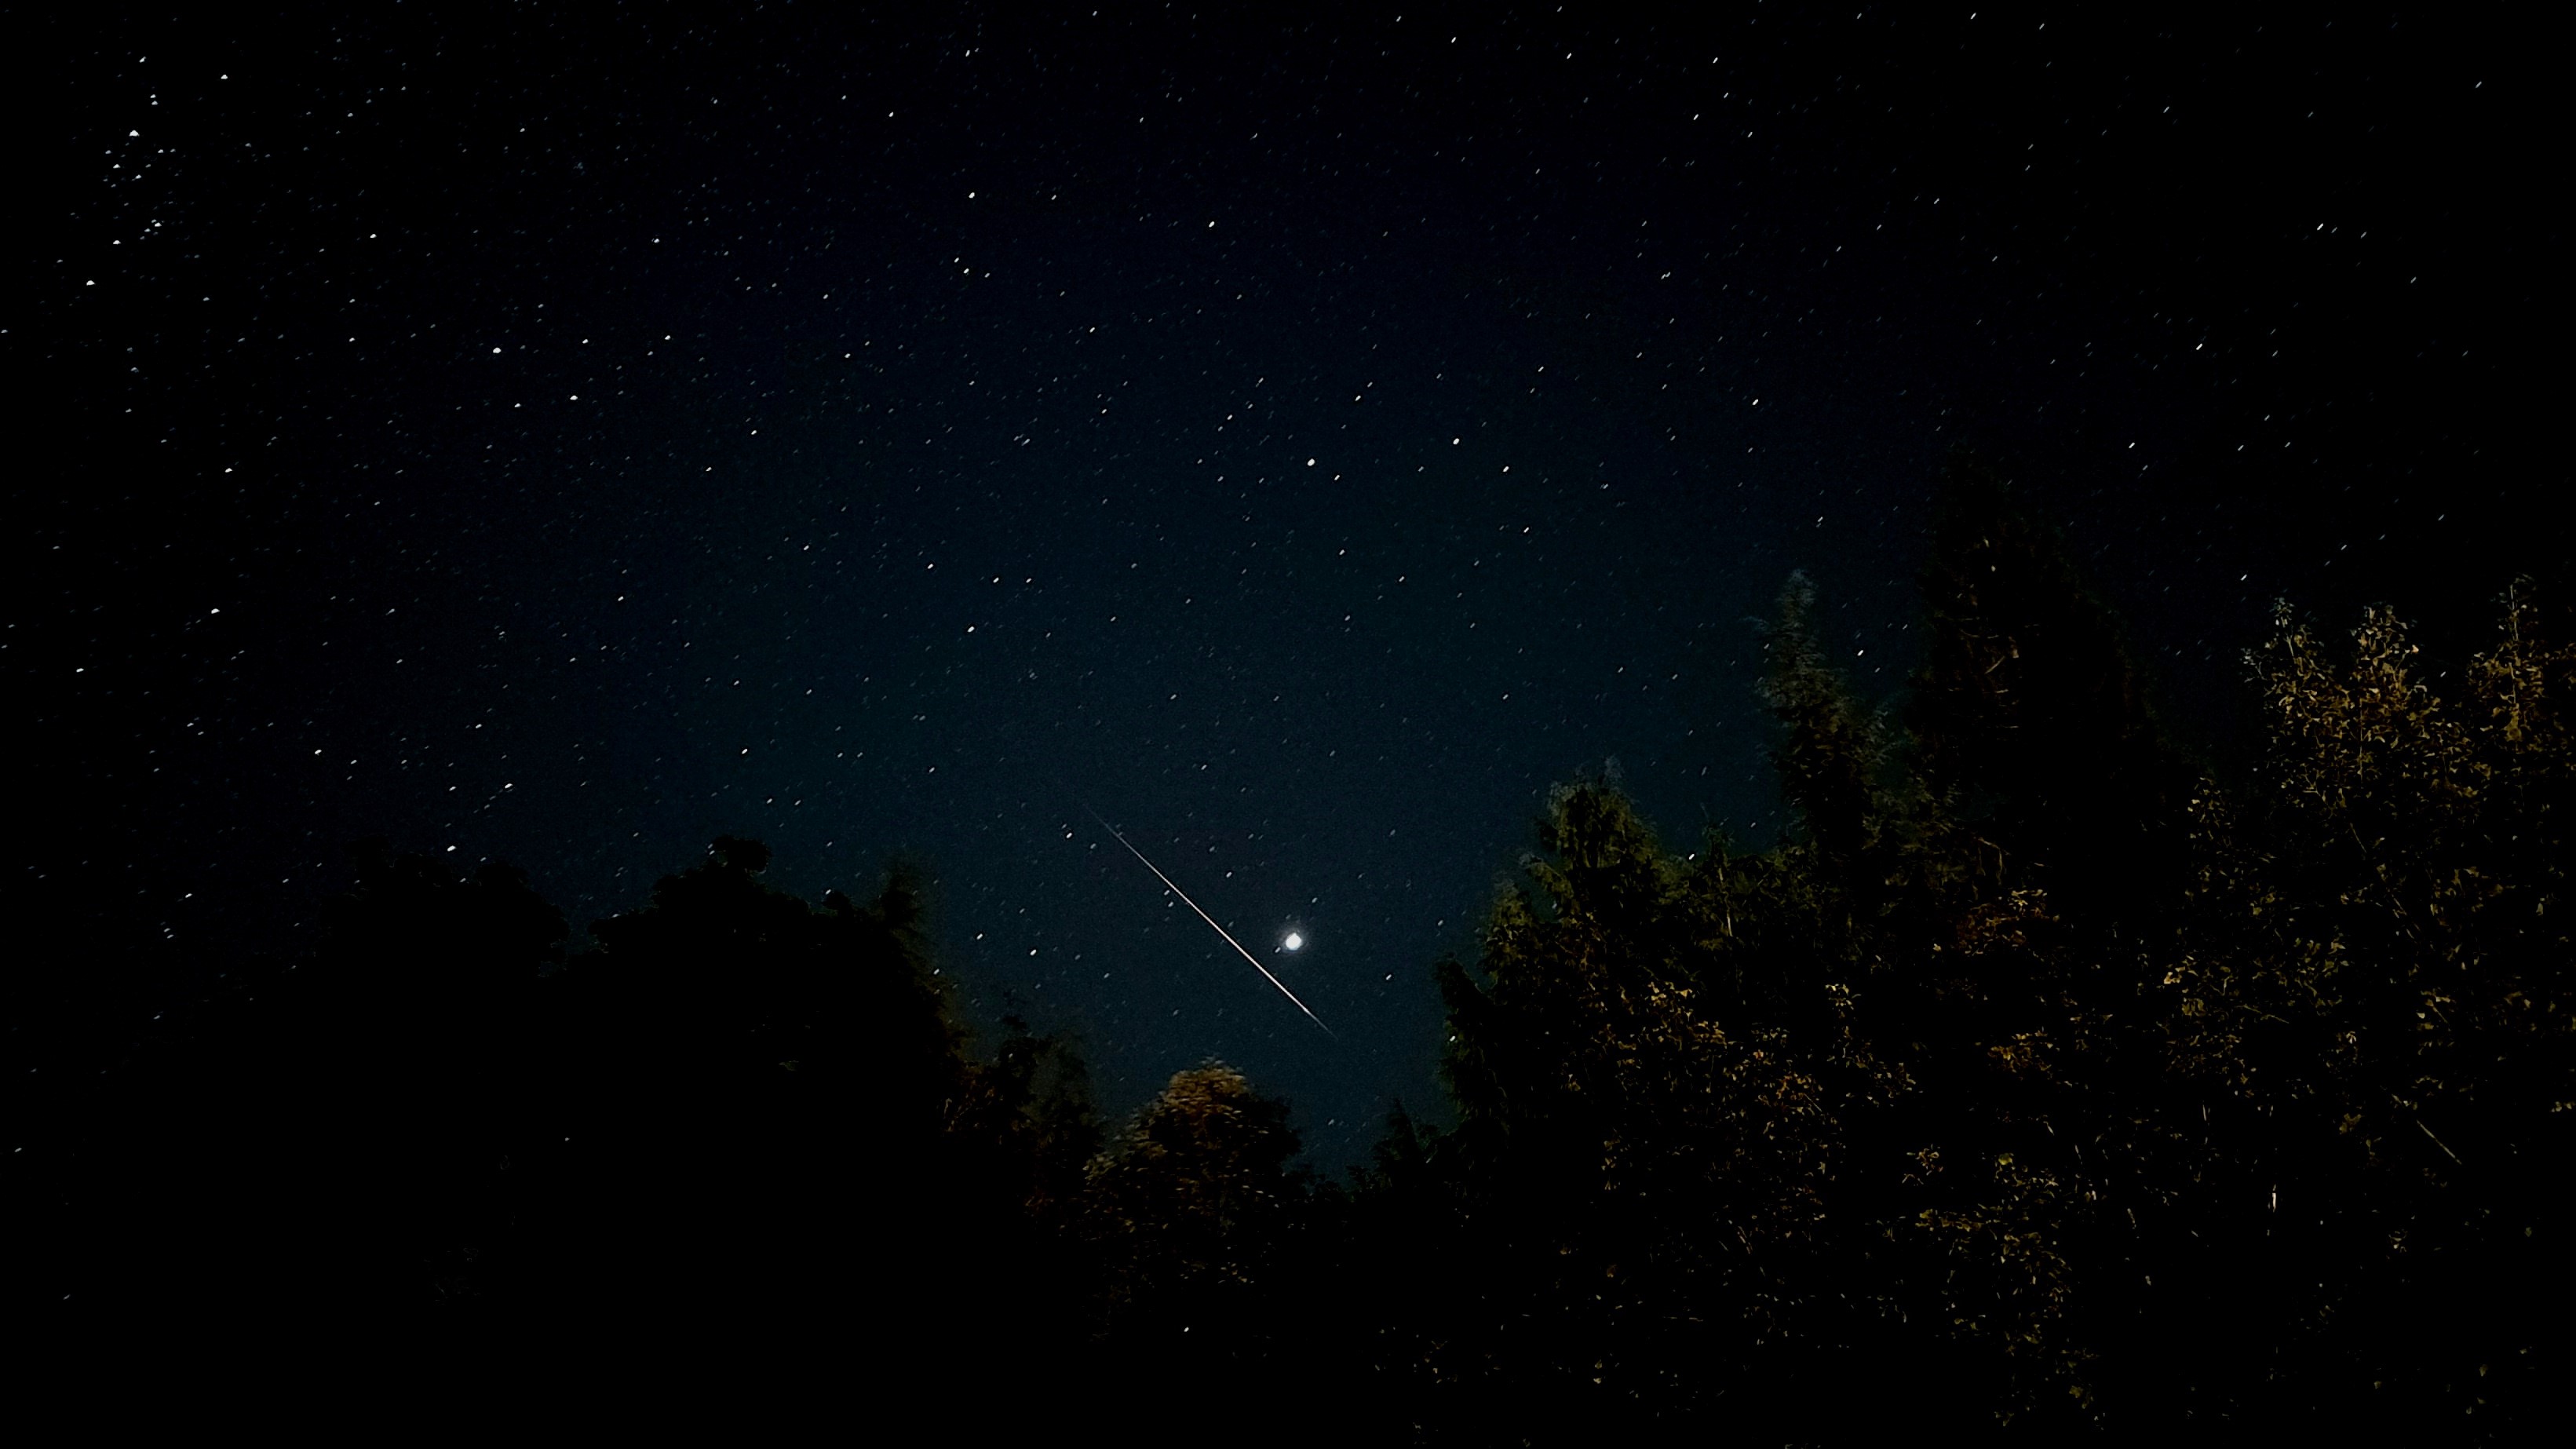 The Perseid meteor shines brightly in Jupiter's lower sky